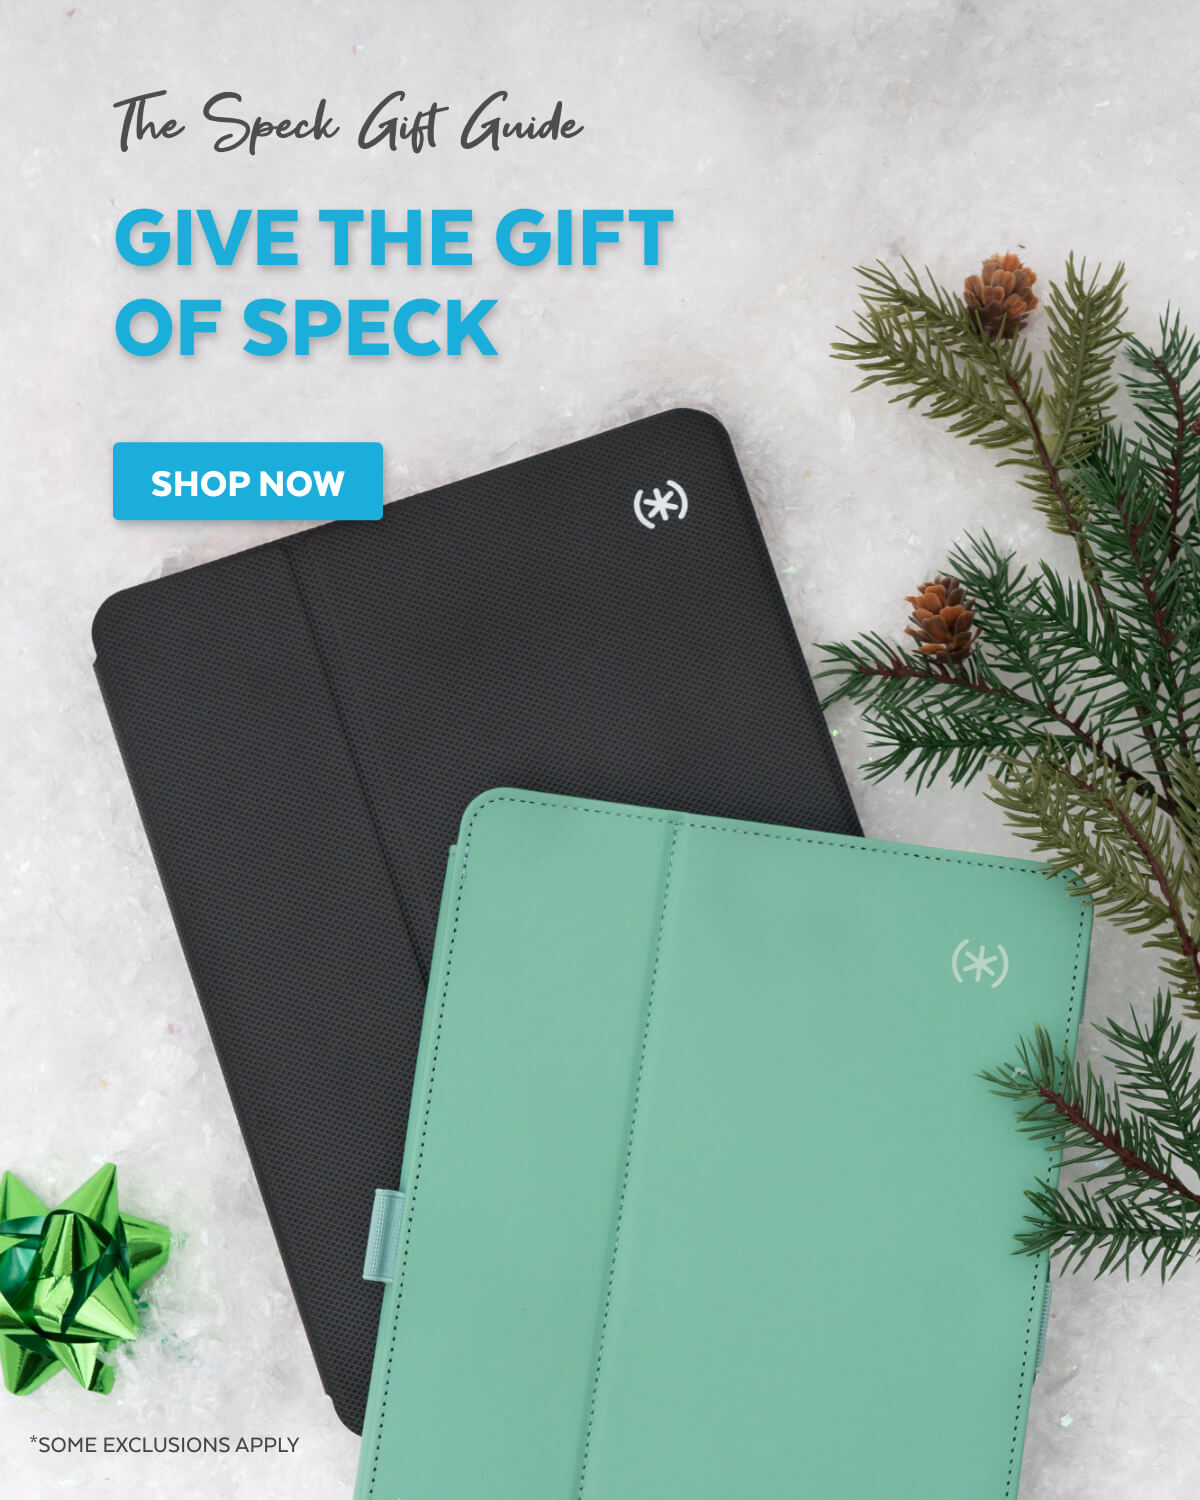 The Speck Gift Guide. Give the gift of Speck. Shop now.